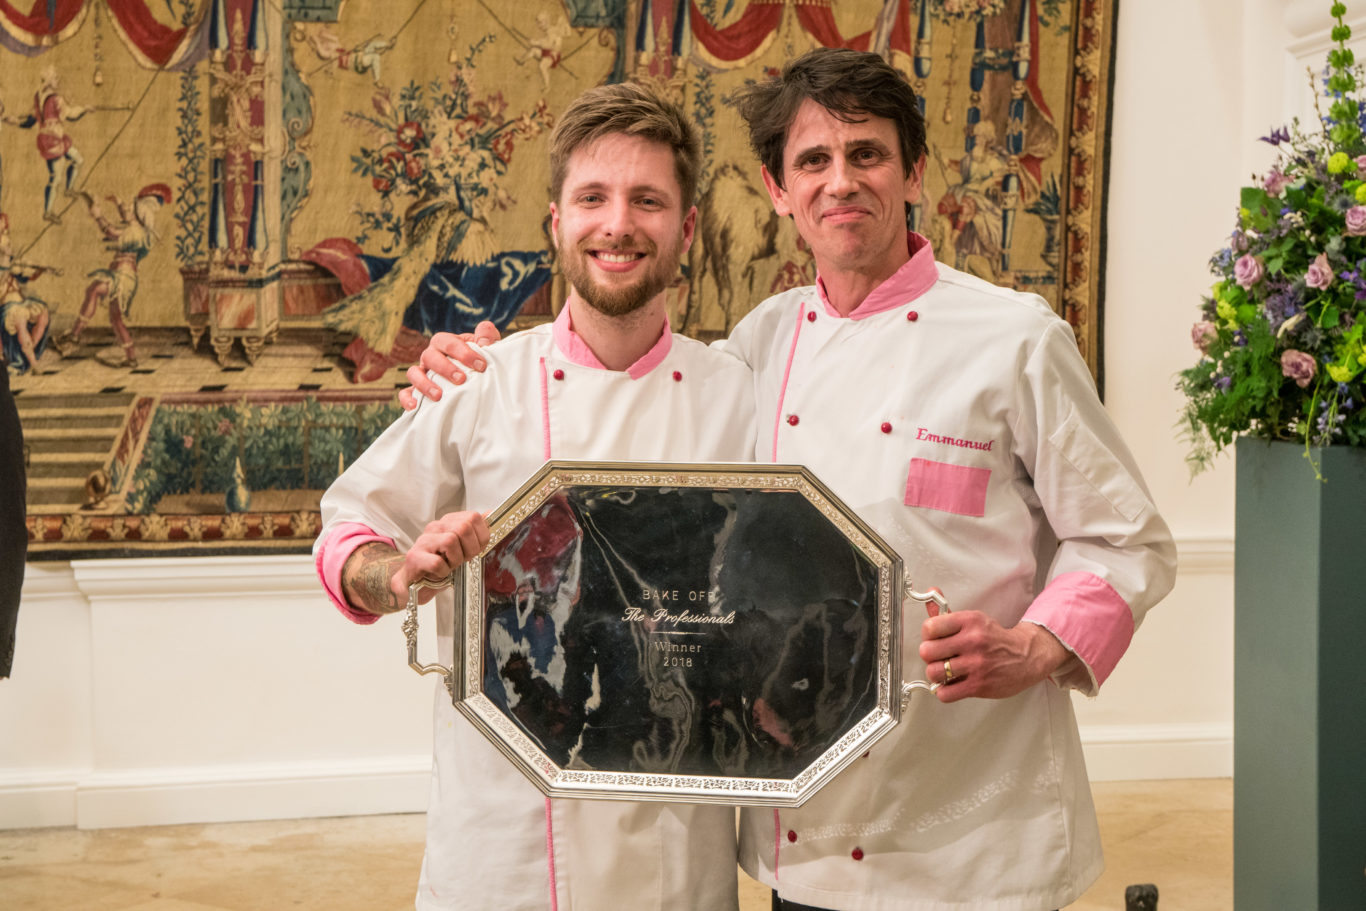 Bake Off The Professionals crowns winners after ninehour challenge